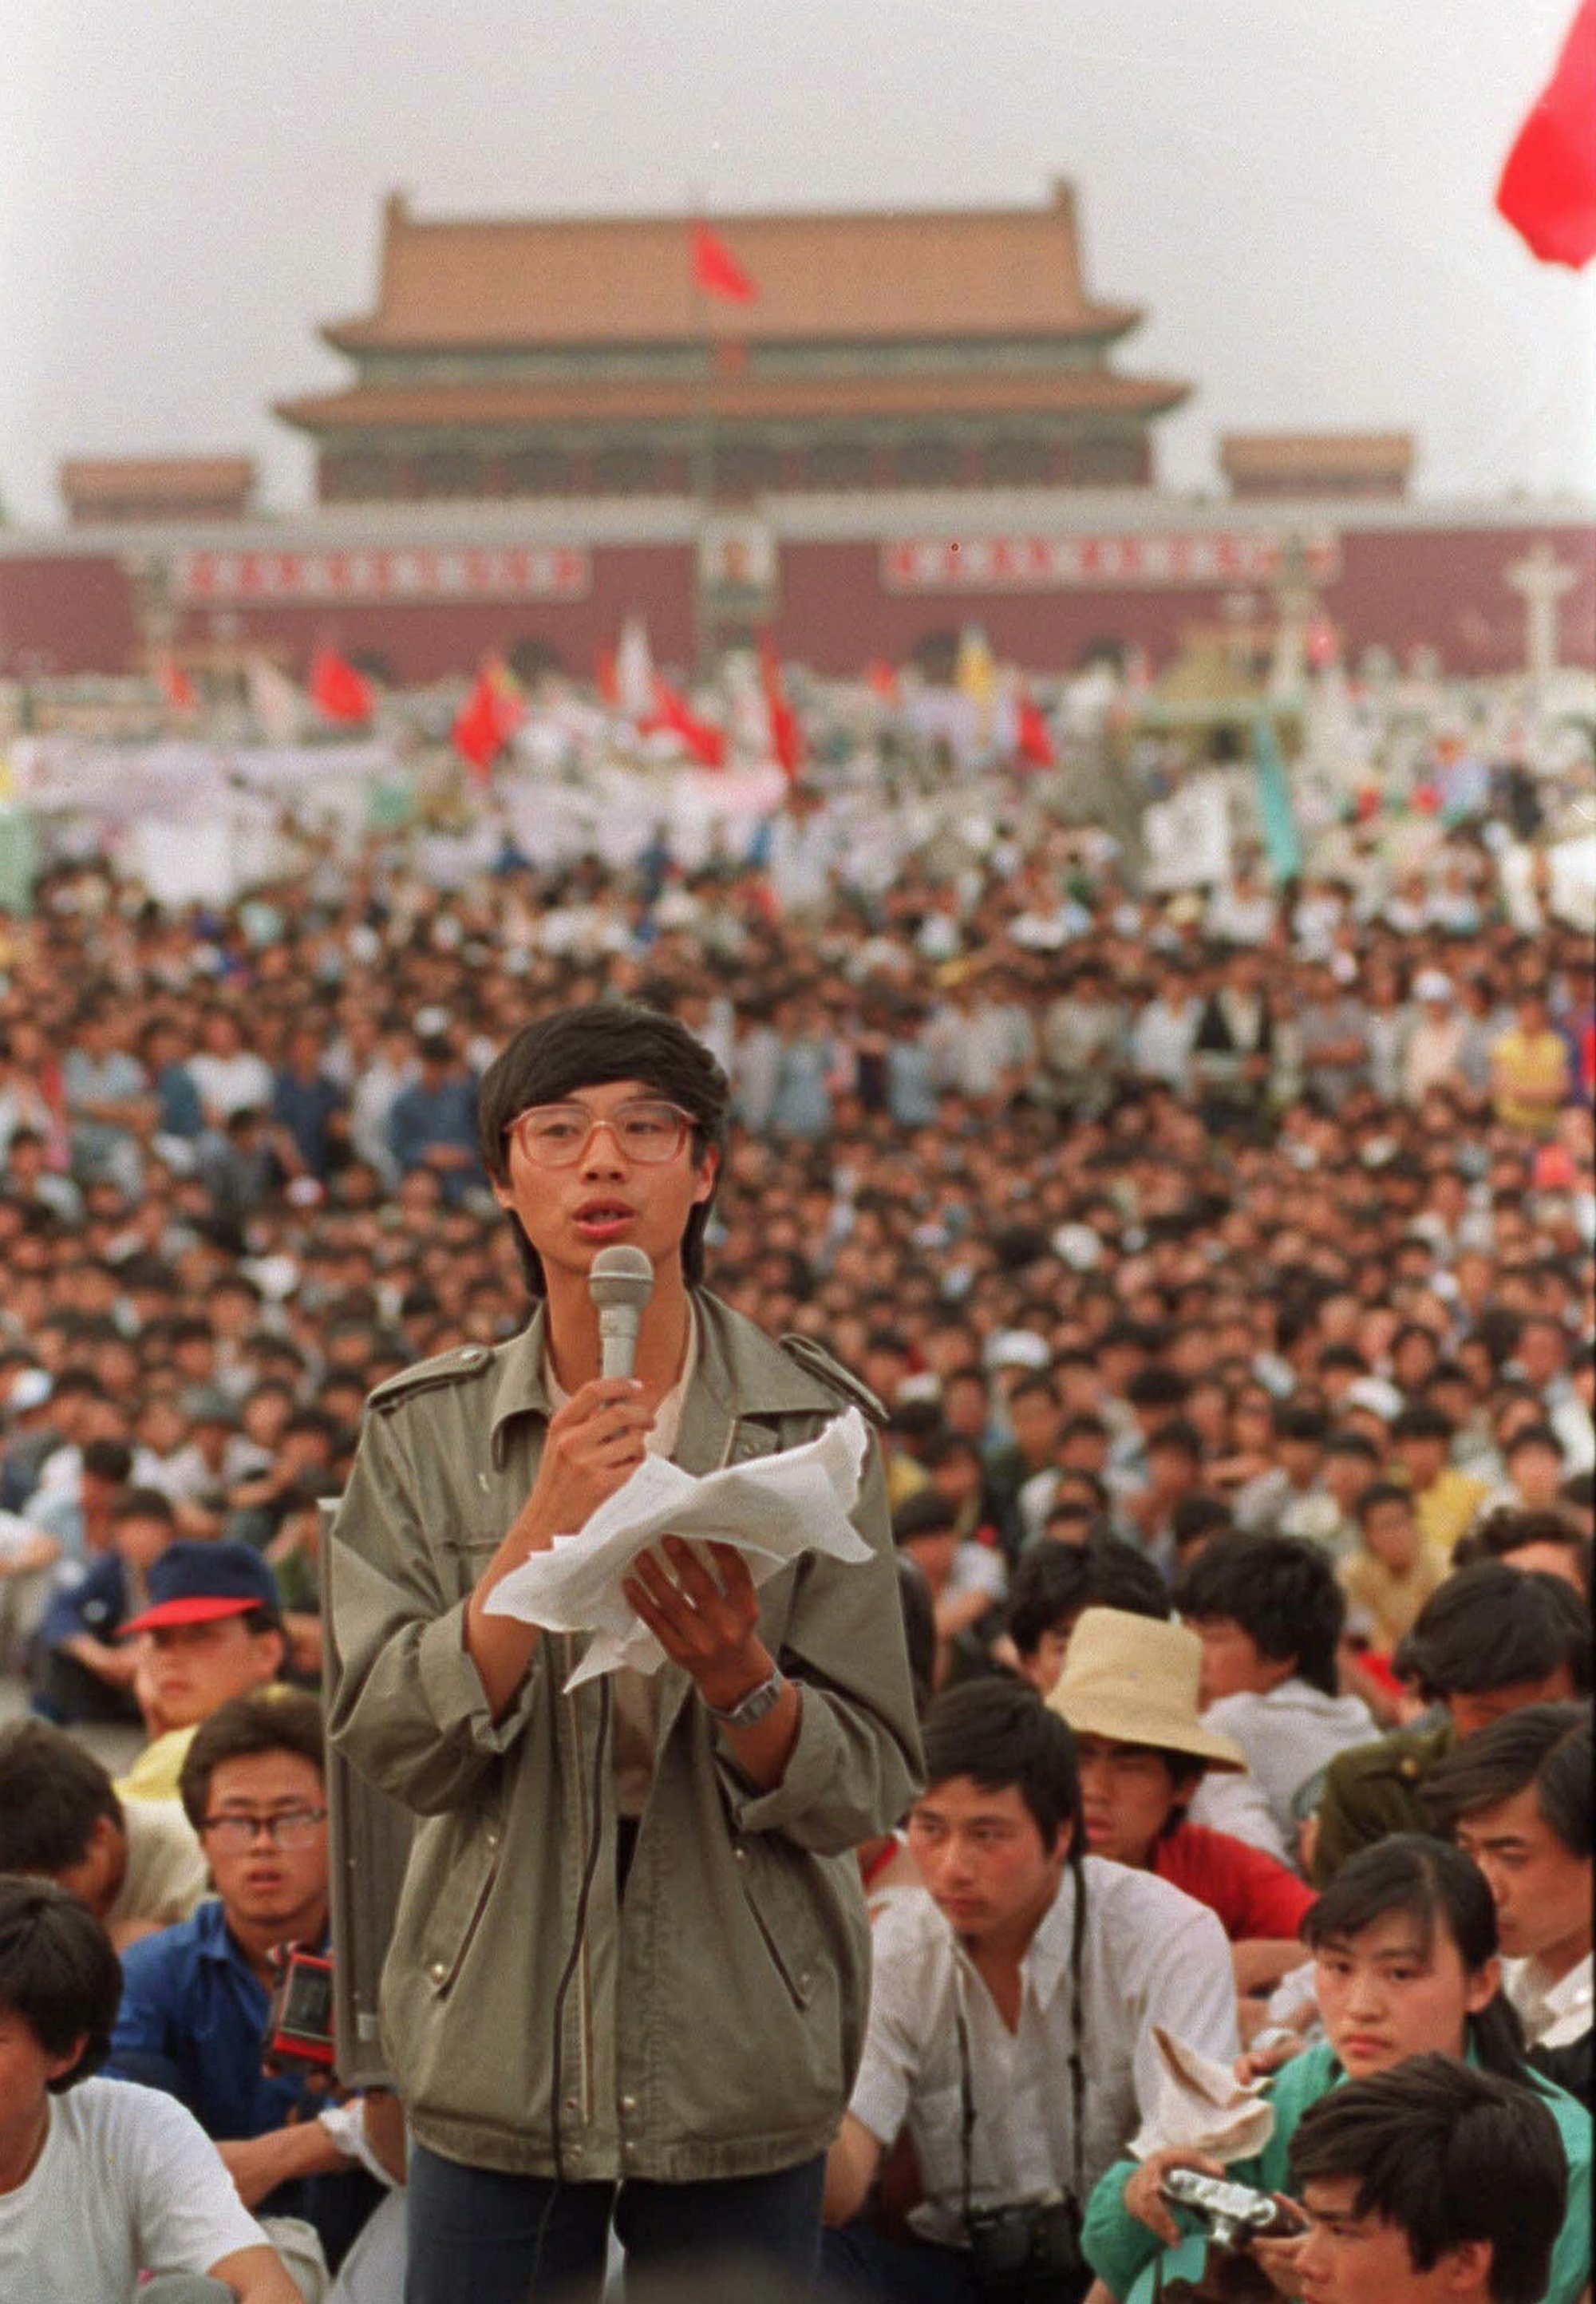 Tiananmen Square 1989: The Impactful Events and Their Complex Depictions